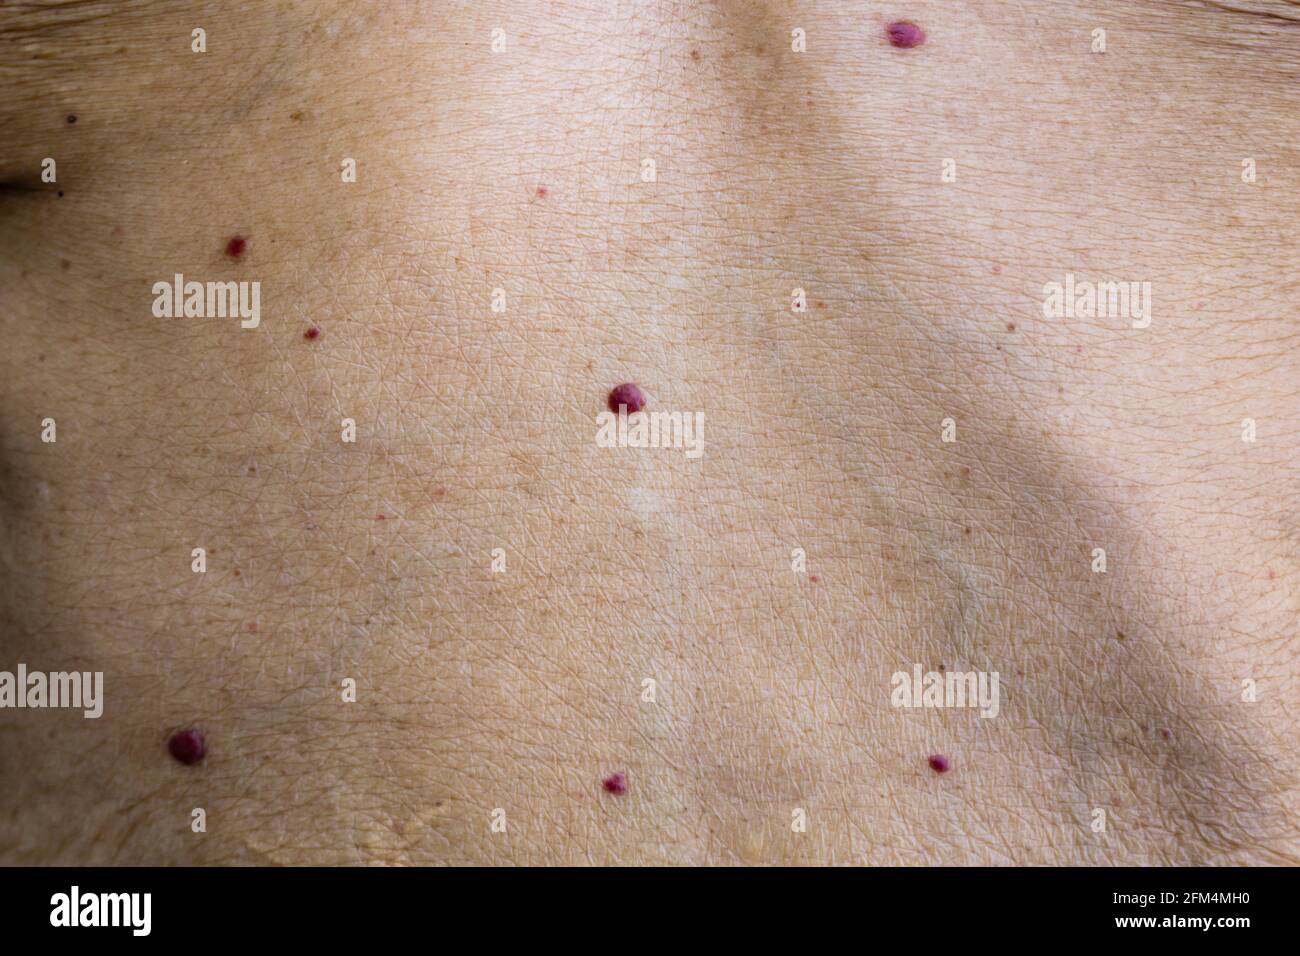 Skin Angiomas Hi Res Stock Photography And Images Alamy